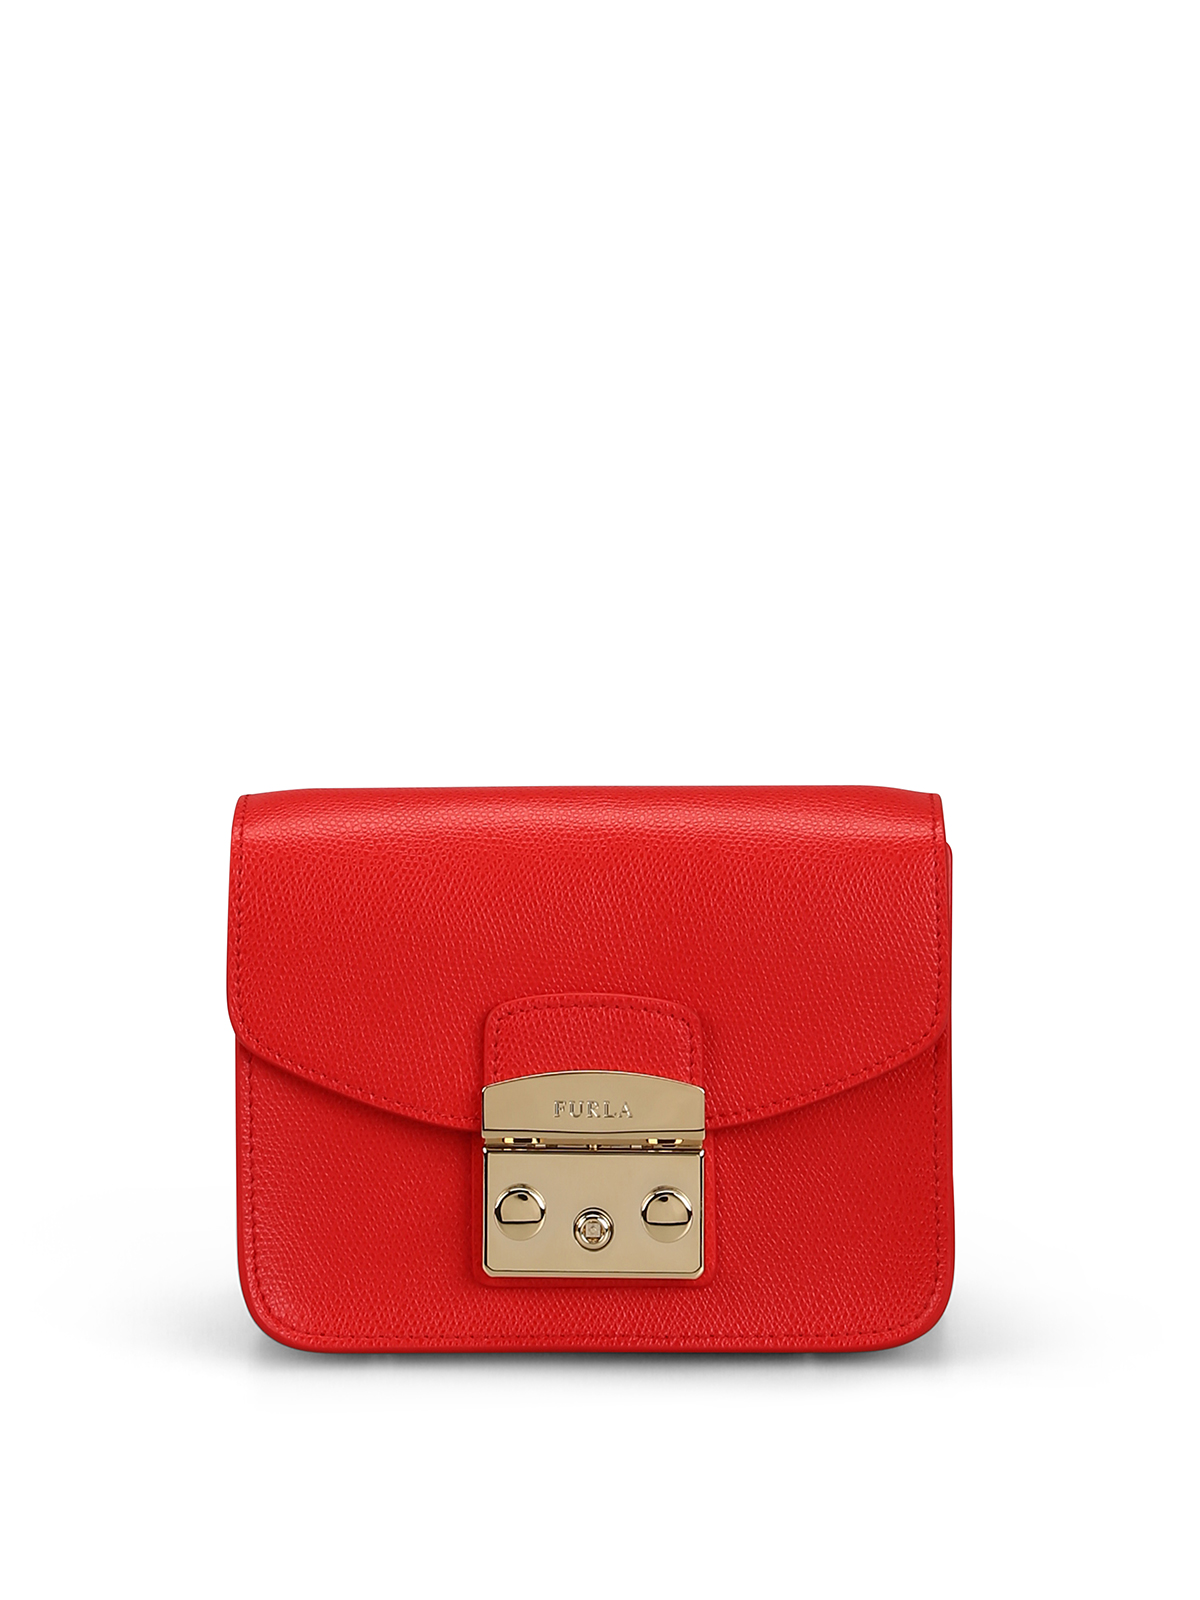 Furla Red Leather Electra L Cosmetic Pouch Furla | TLC